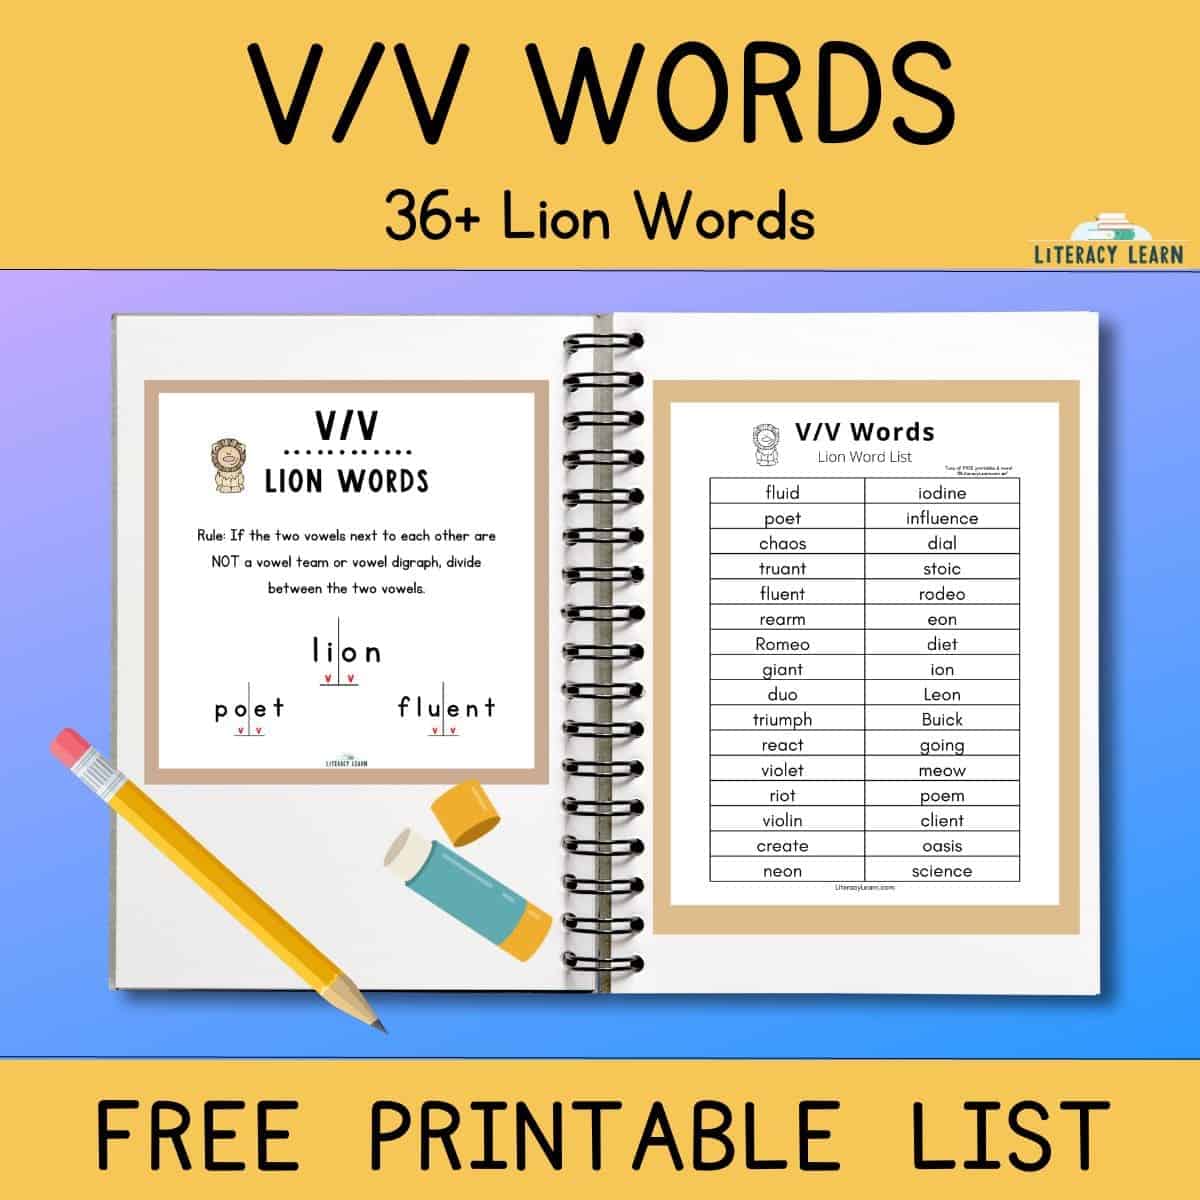 Colorful Graphic entitled "V/V Words 36+ Lion Words" with notebook and word list/graphic.